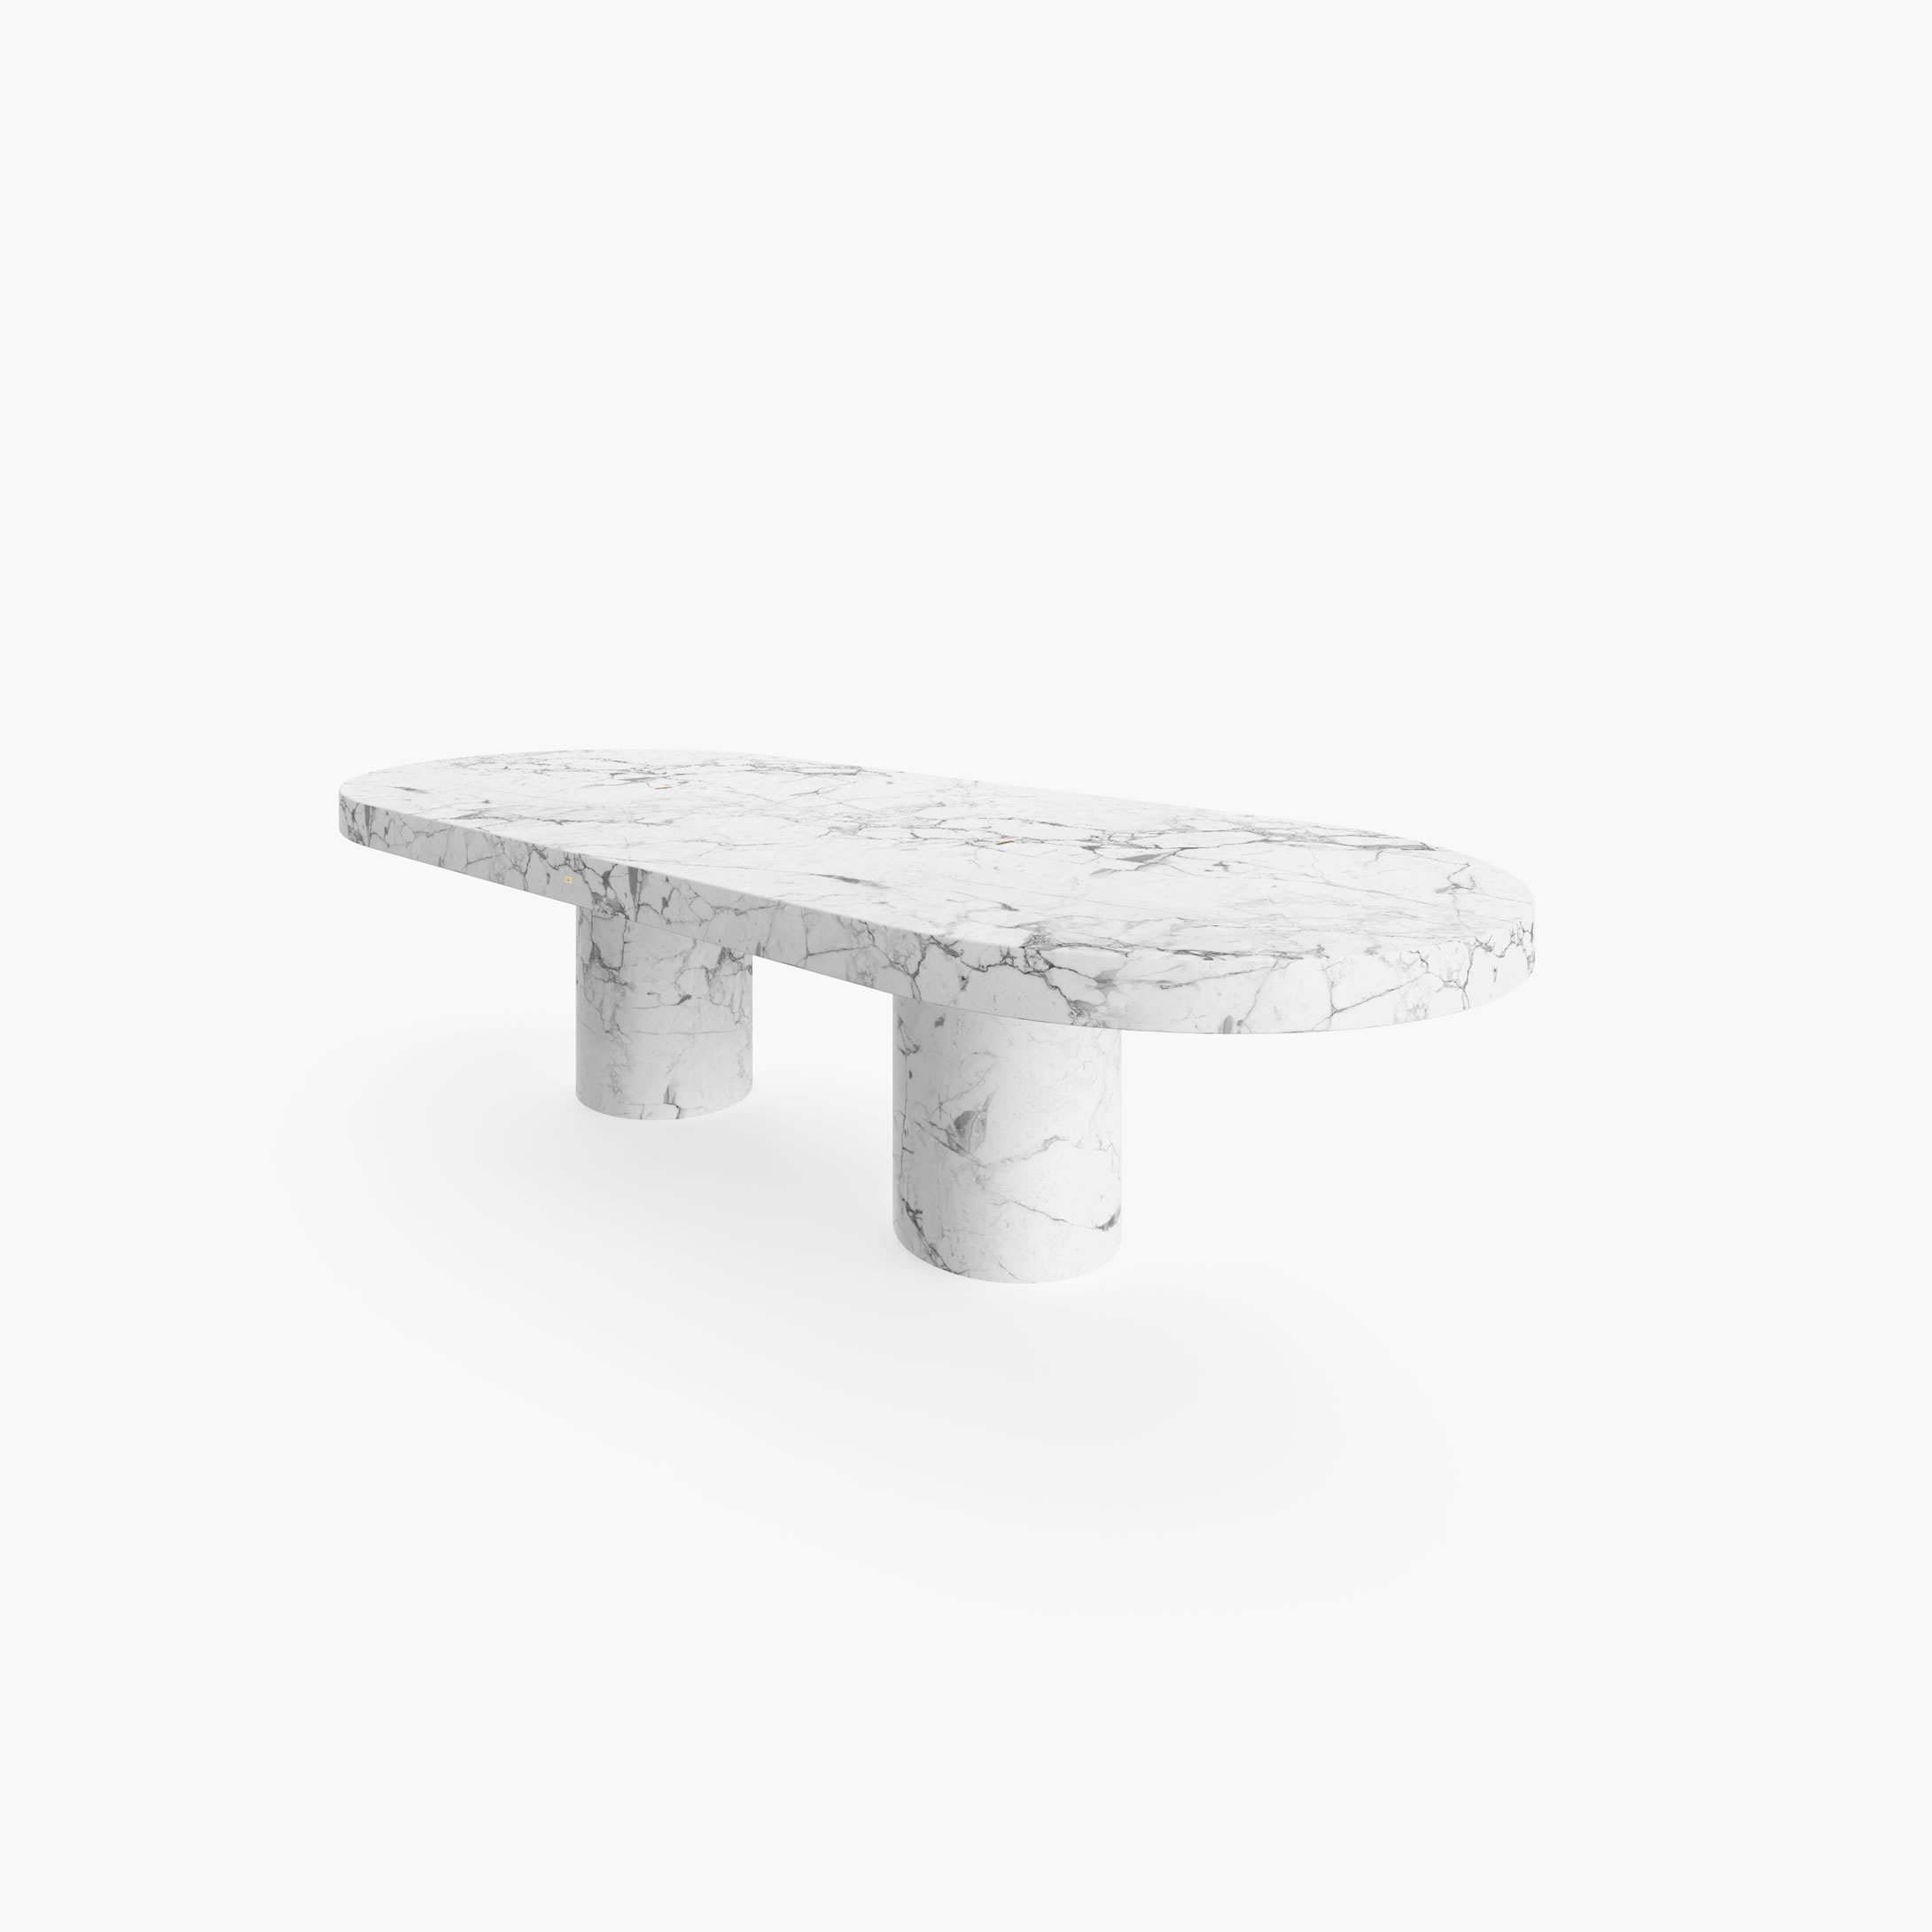 Dining Table Cylinder legs White Arabescato Marble geometric Dining Room masterpieces Dining Tables FS 178 FELIX SCHWAKE